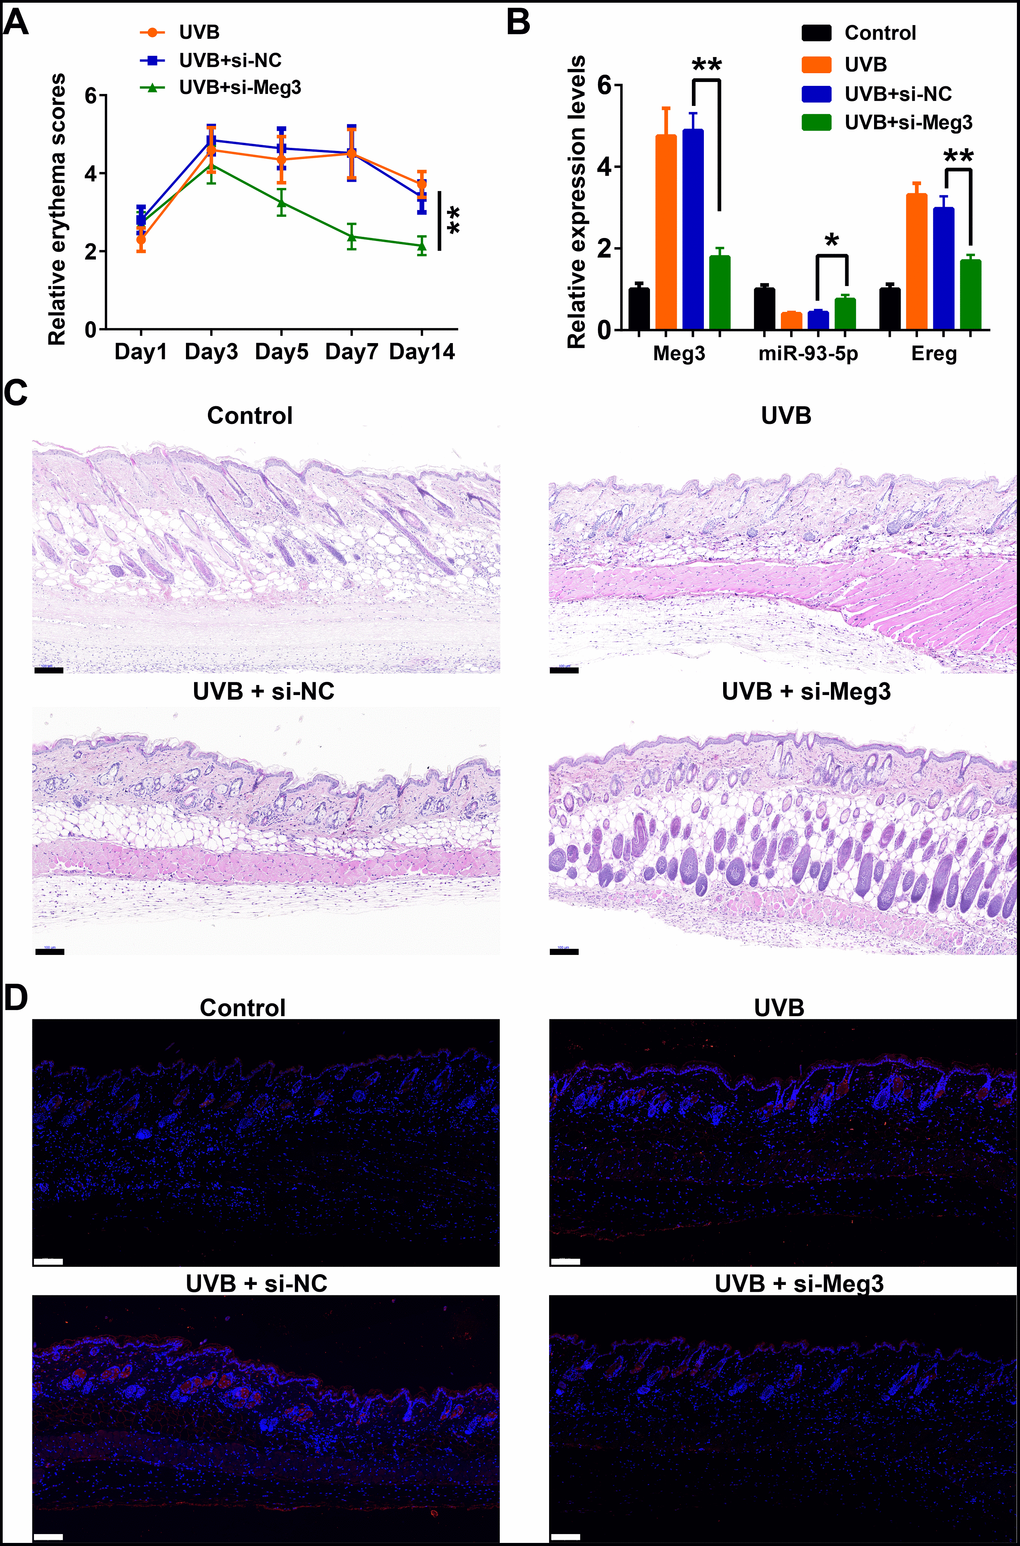 Meg3 siRNA alleviates UVB-induced skin lesions in a mouse model. (A) Measurement of average erythema score of the murine dorsal skin with or without UVB irradiation. Values presented as mean ± SD. (B) Relative expression levels of Meg3, miR-93-5p and Ereg were determined by qRT-PCR. (C) H&E staining of the murine dorsal skin sample after UVB irradiation with or without si-Meg3 treatment (scale bar = 100 μm). (D) FISH of Meg3 in the murine dorsal skin sample after UVB irradiation with or without si-Meg3 treatment (scale bar = 100 μm).